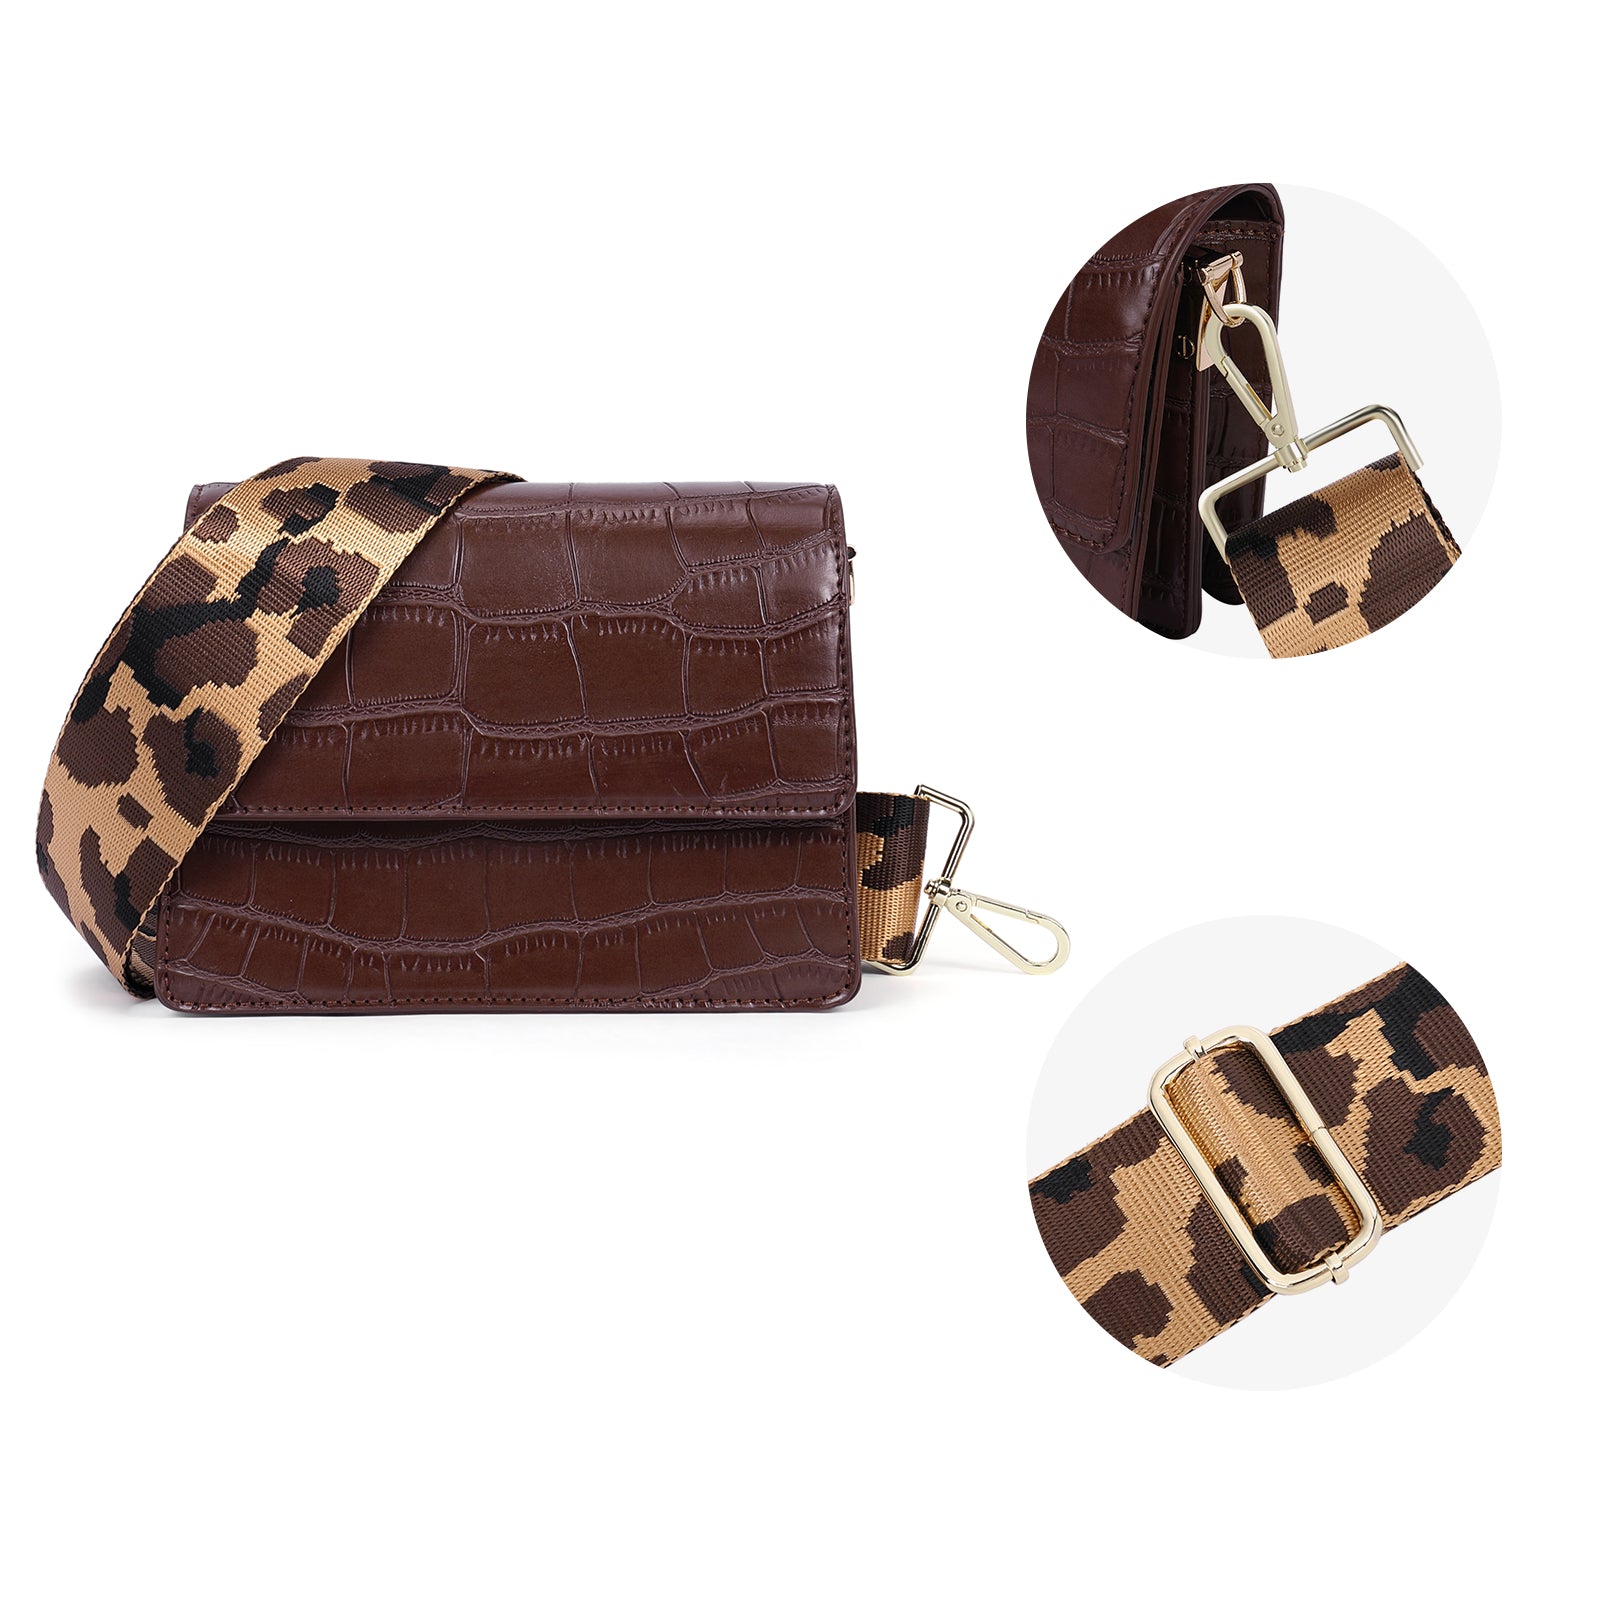 Replacement Purse Straps Crossbody Wide Leather Leopard Purse 